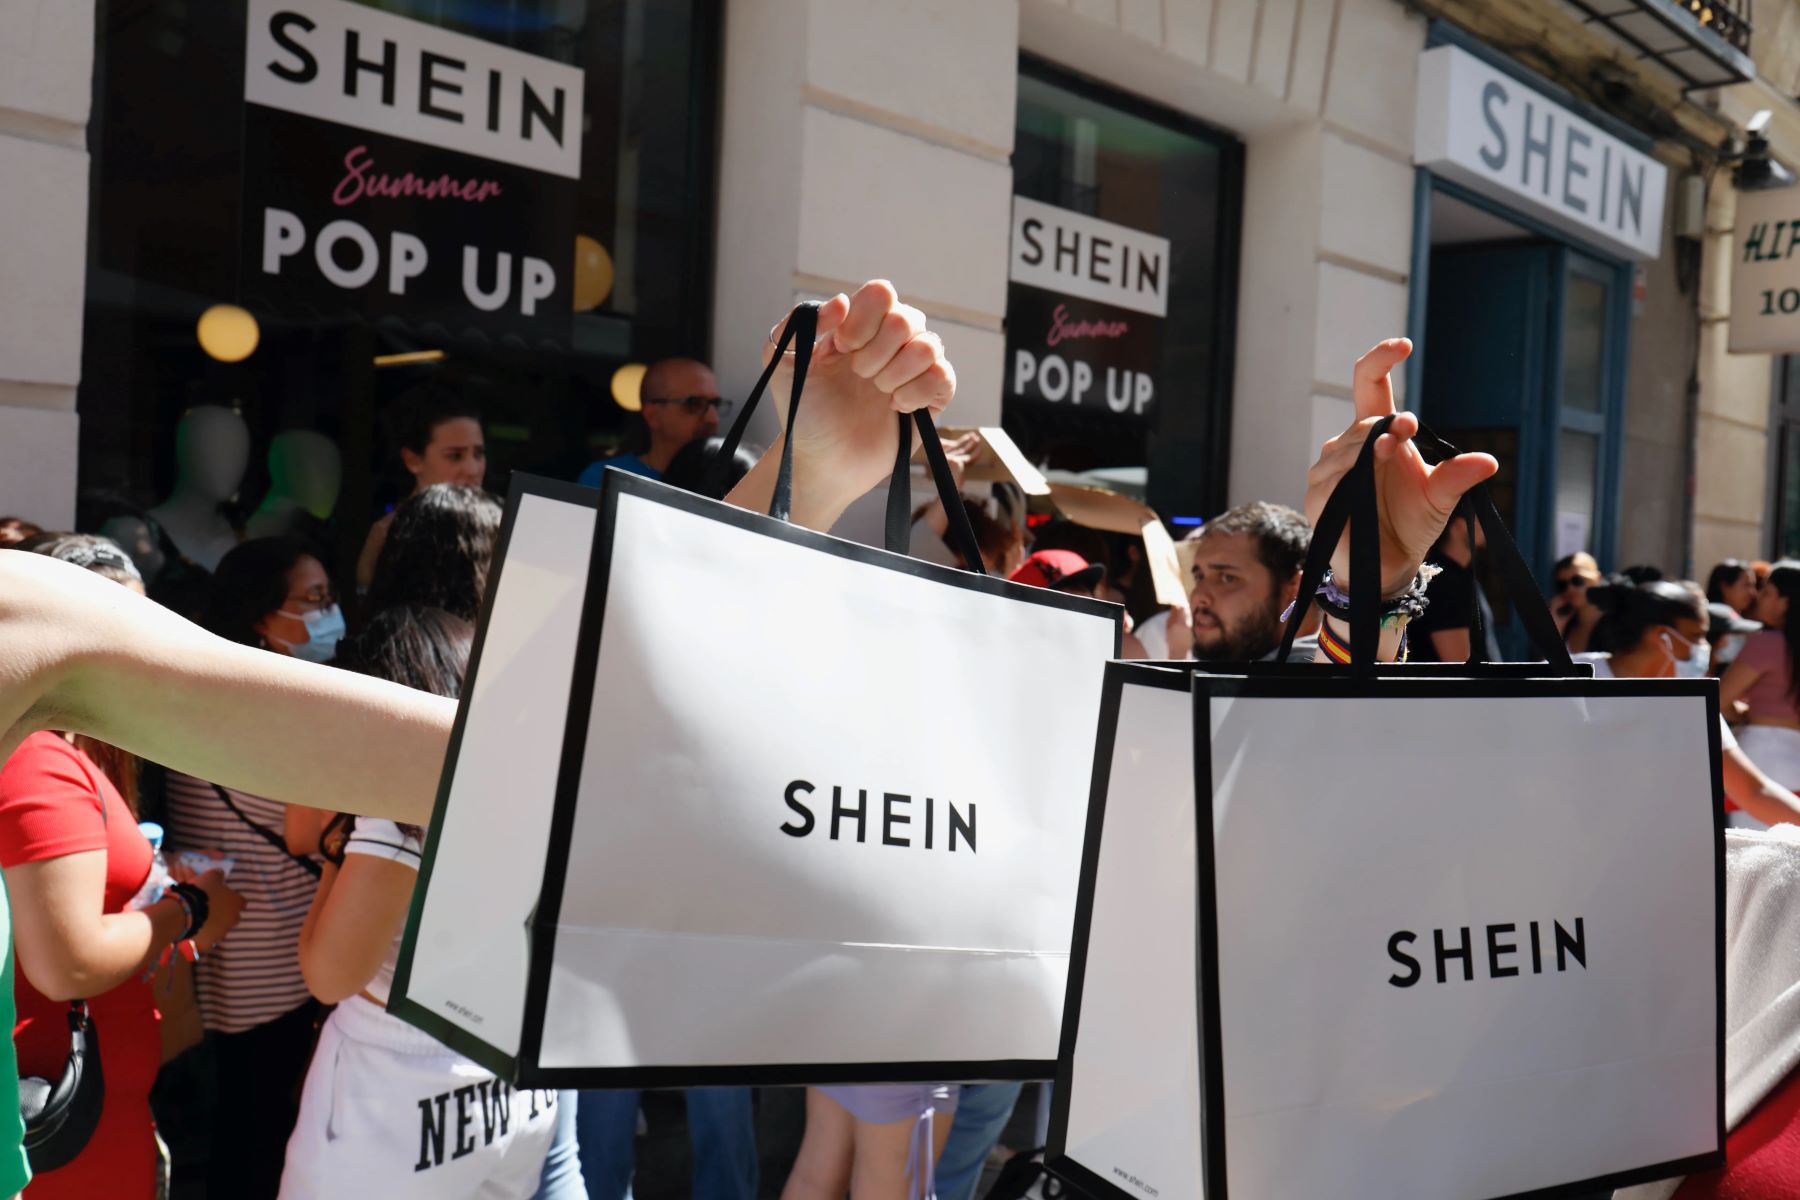 How To Add A Credit Card To Shein